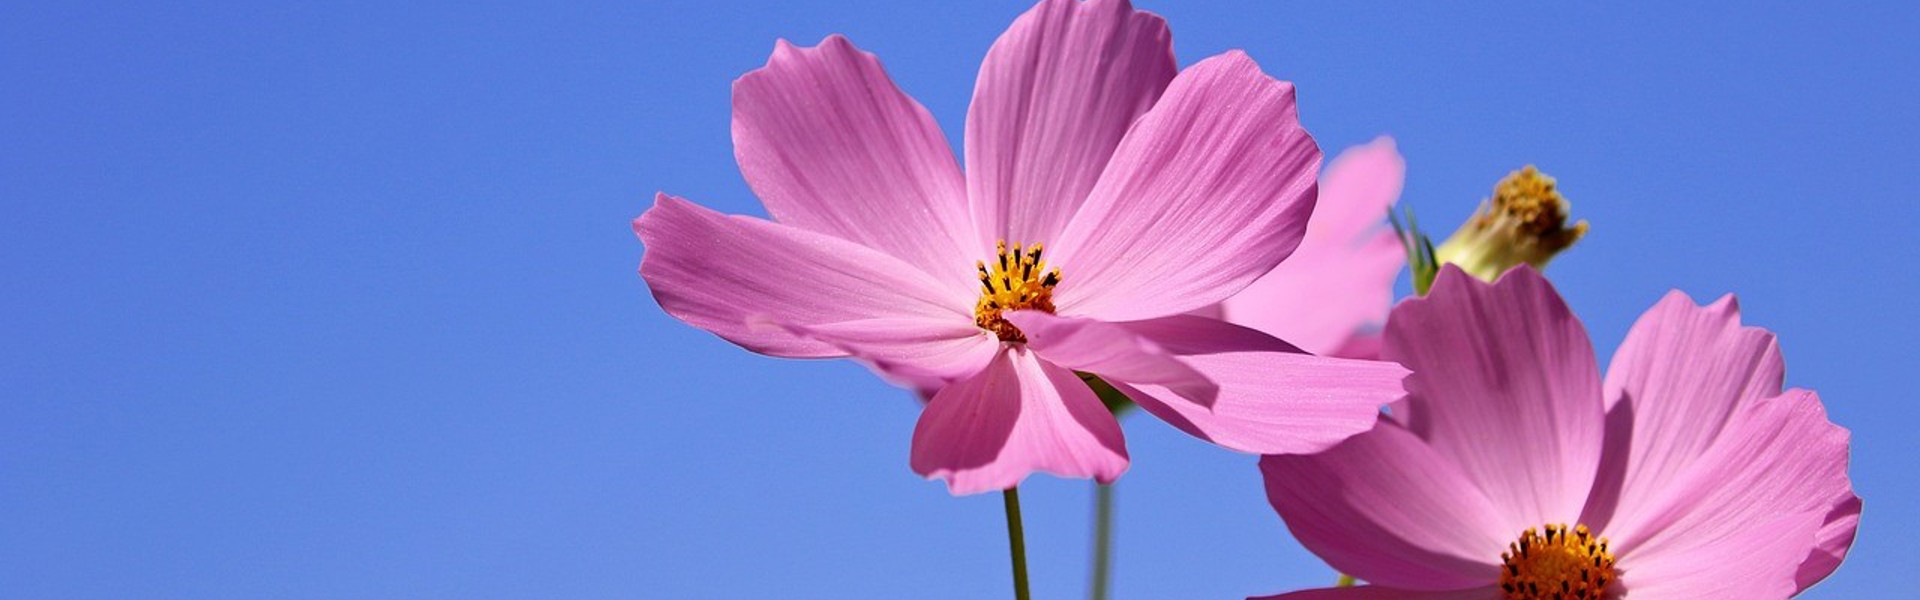 two pink flowers on a blue sky background